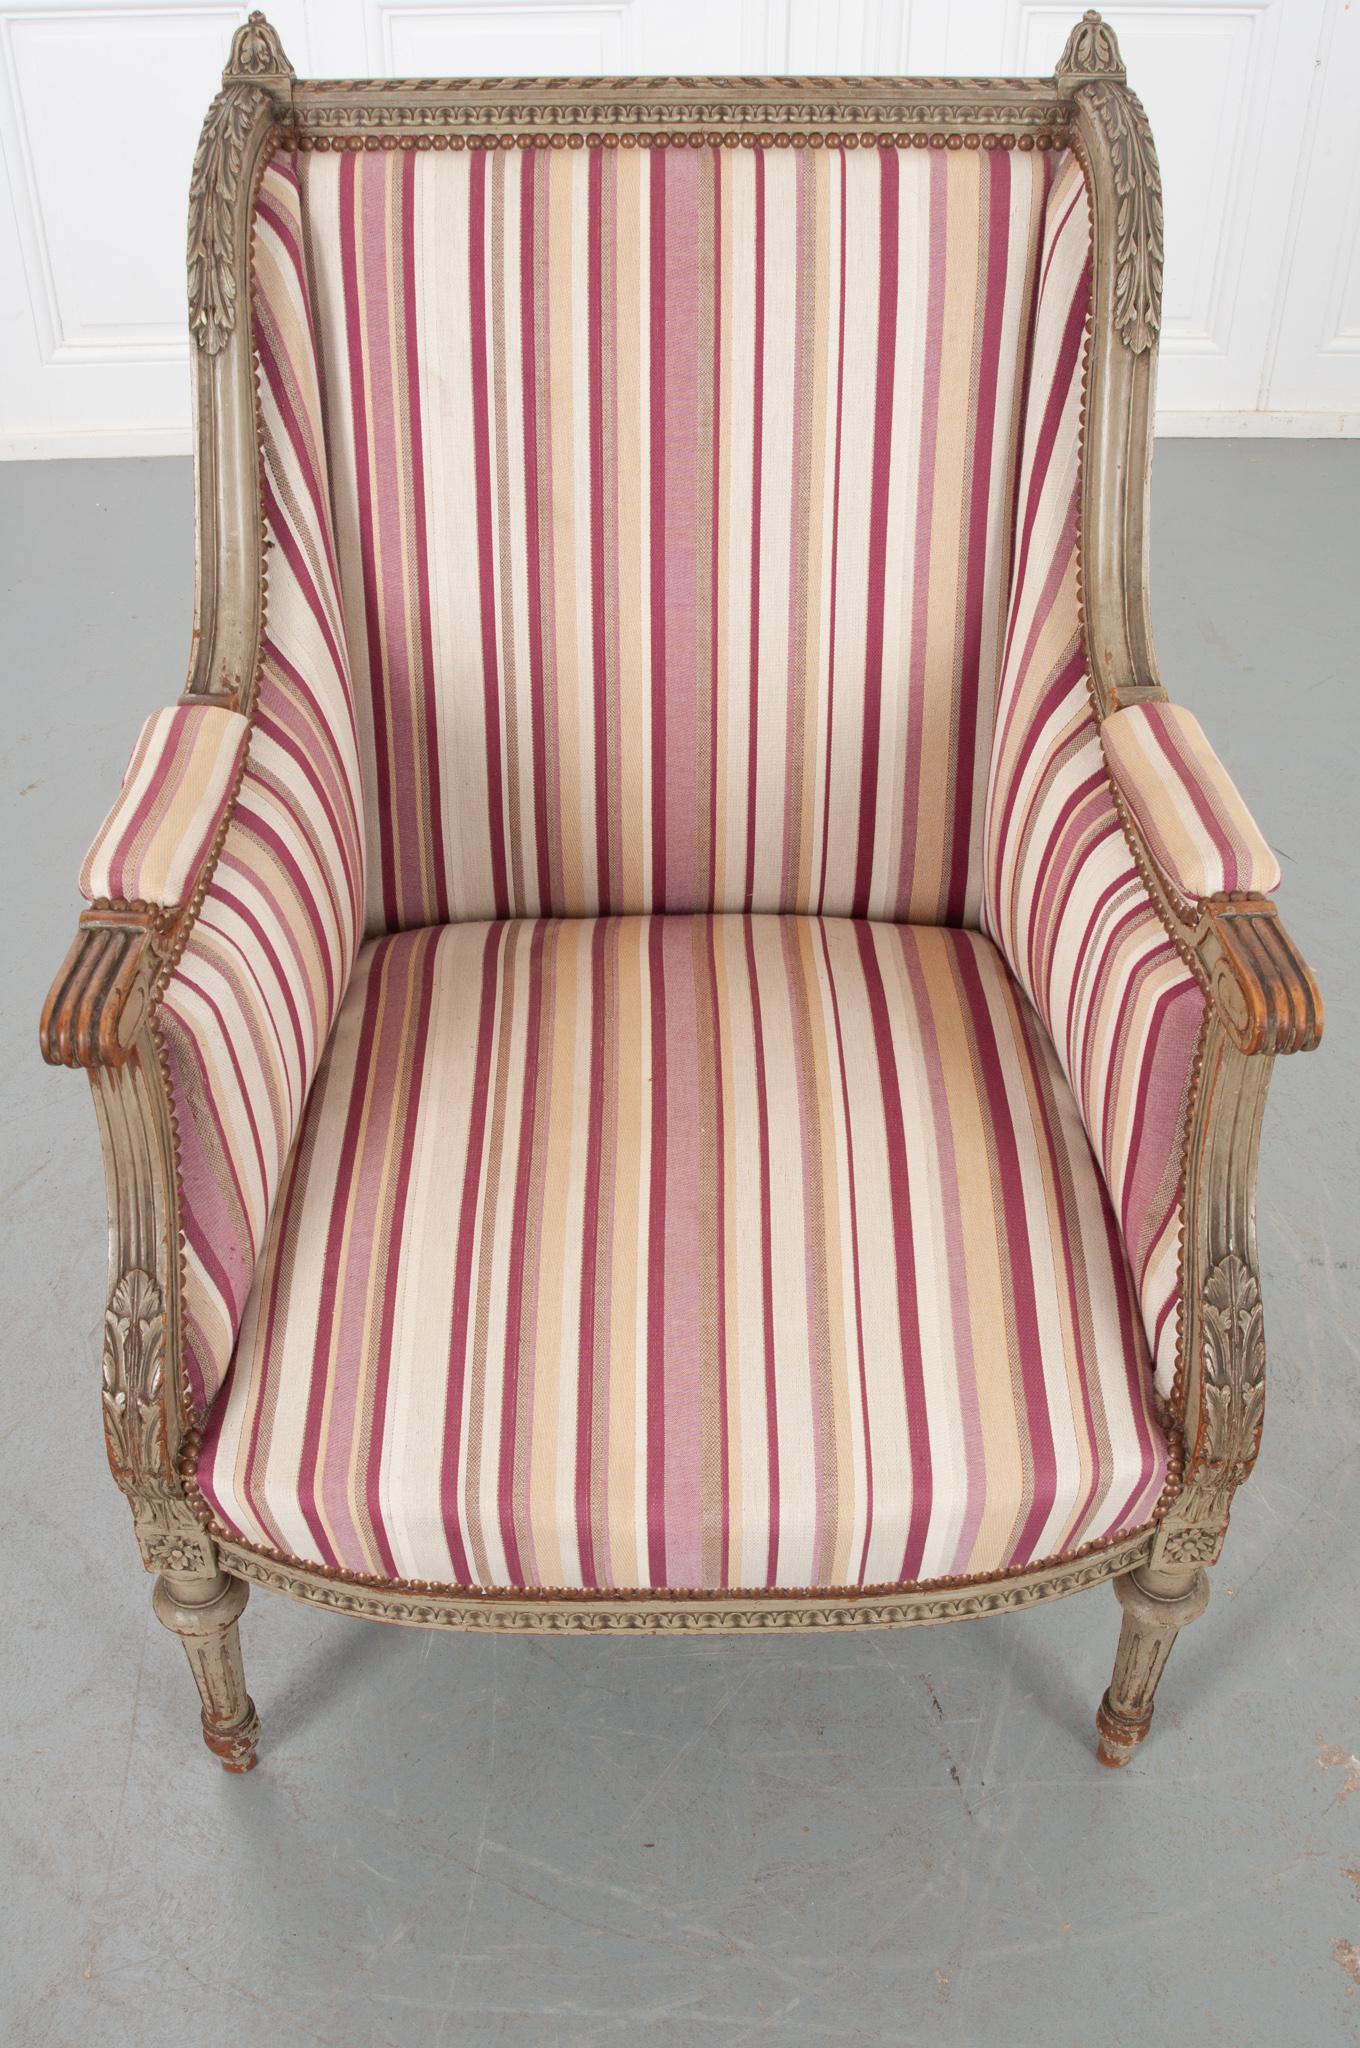 French 19th Century Painted Louis XVI-Style Bergere In Good Condition For Sale In Baton Rouge, LA